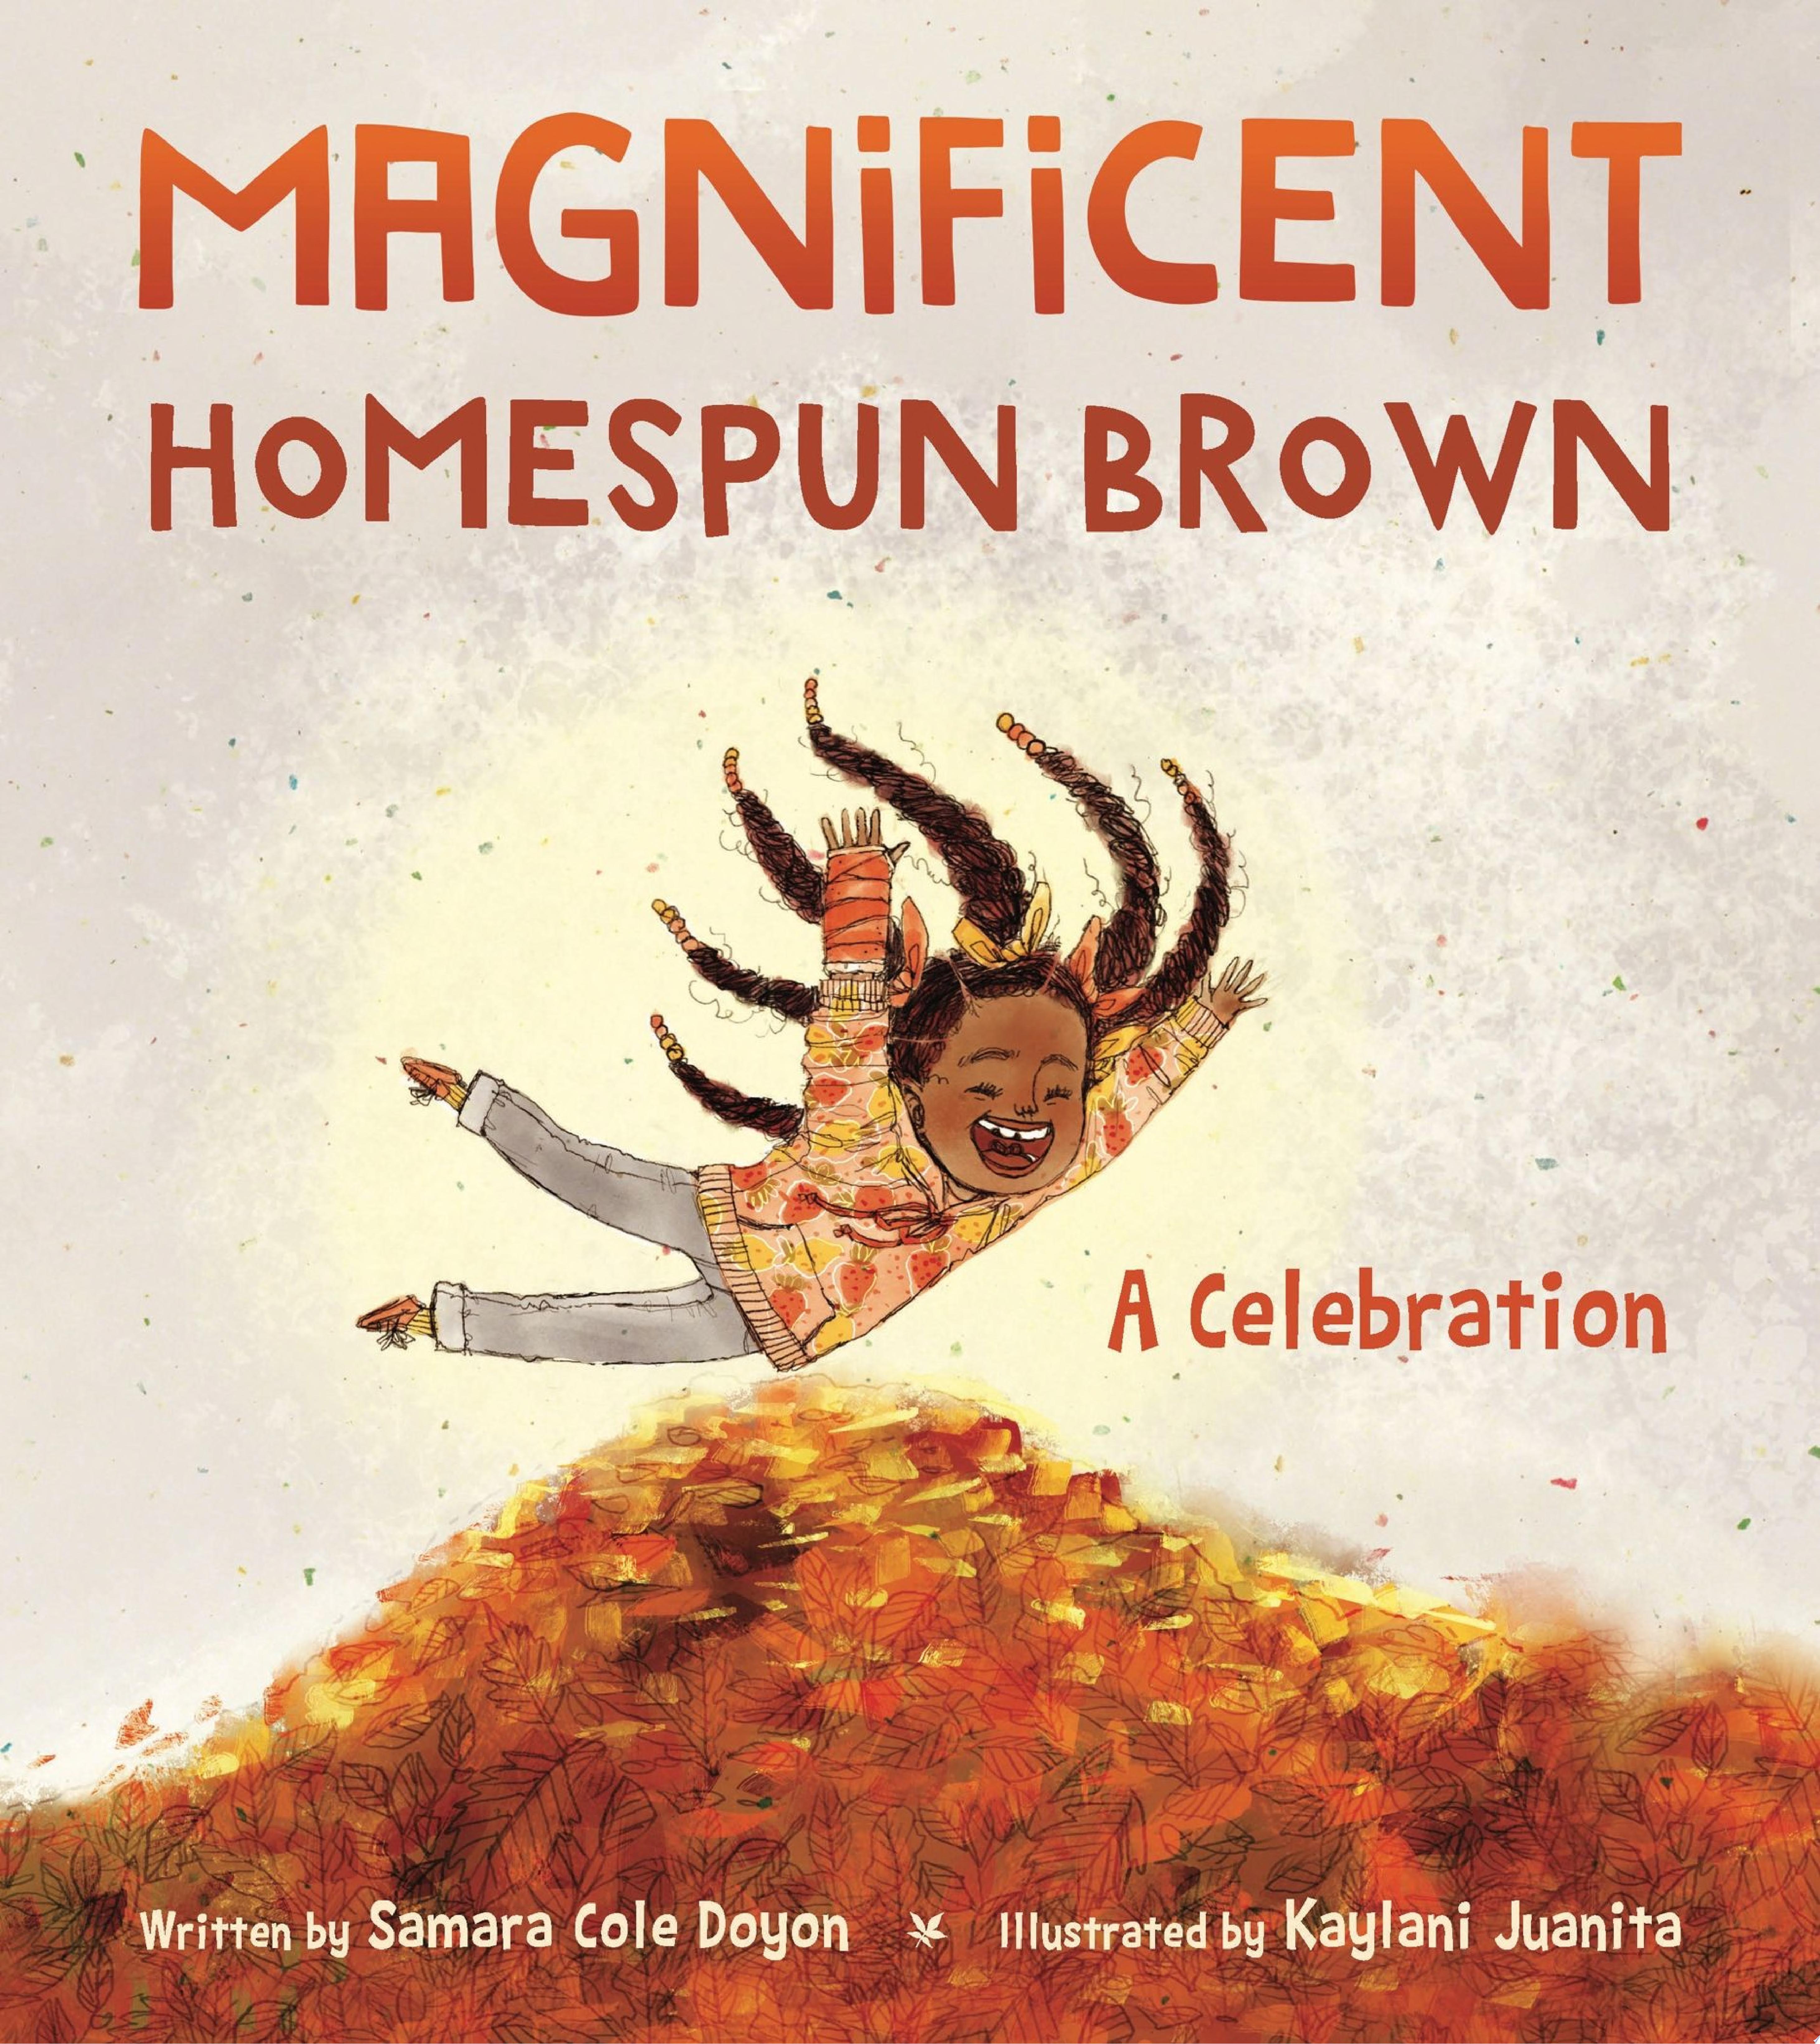 Image for "Magnificent Homespun Brown: A Celebration"